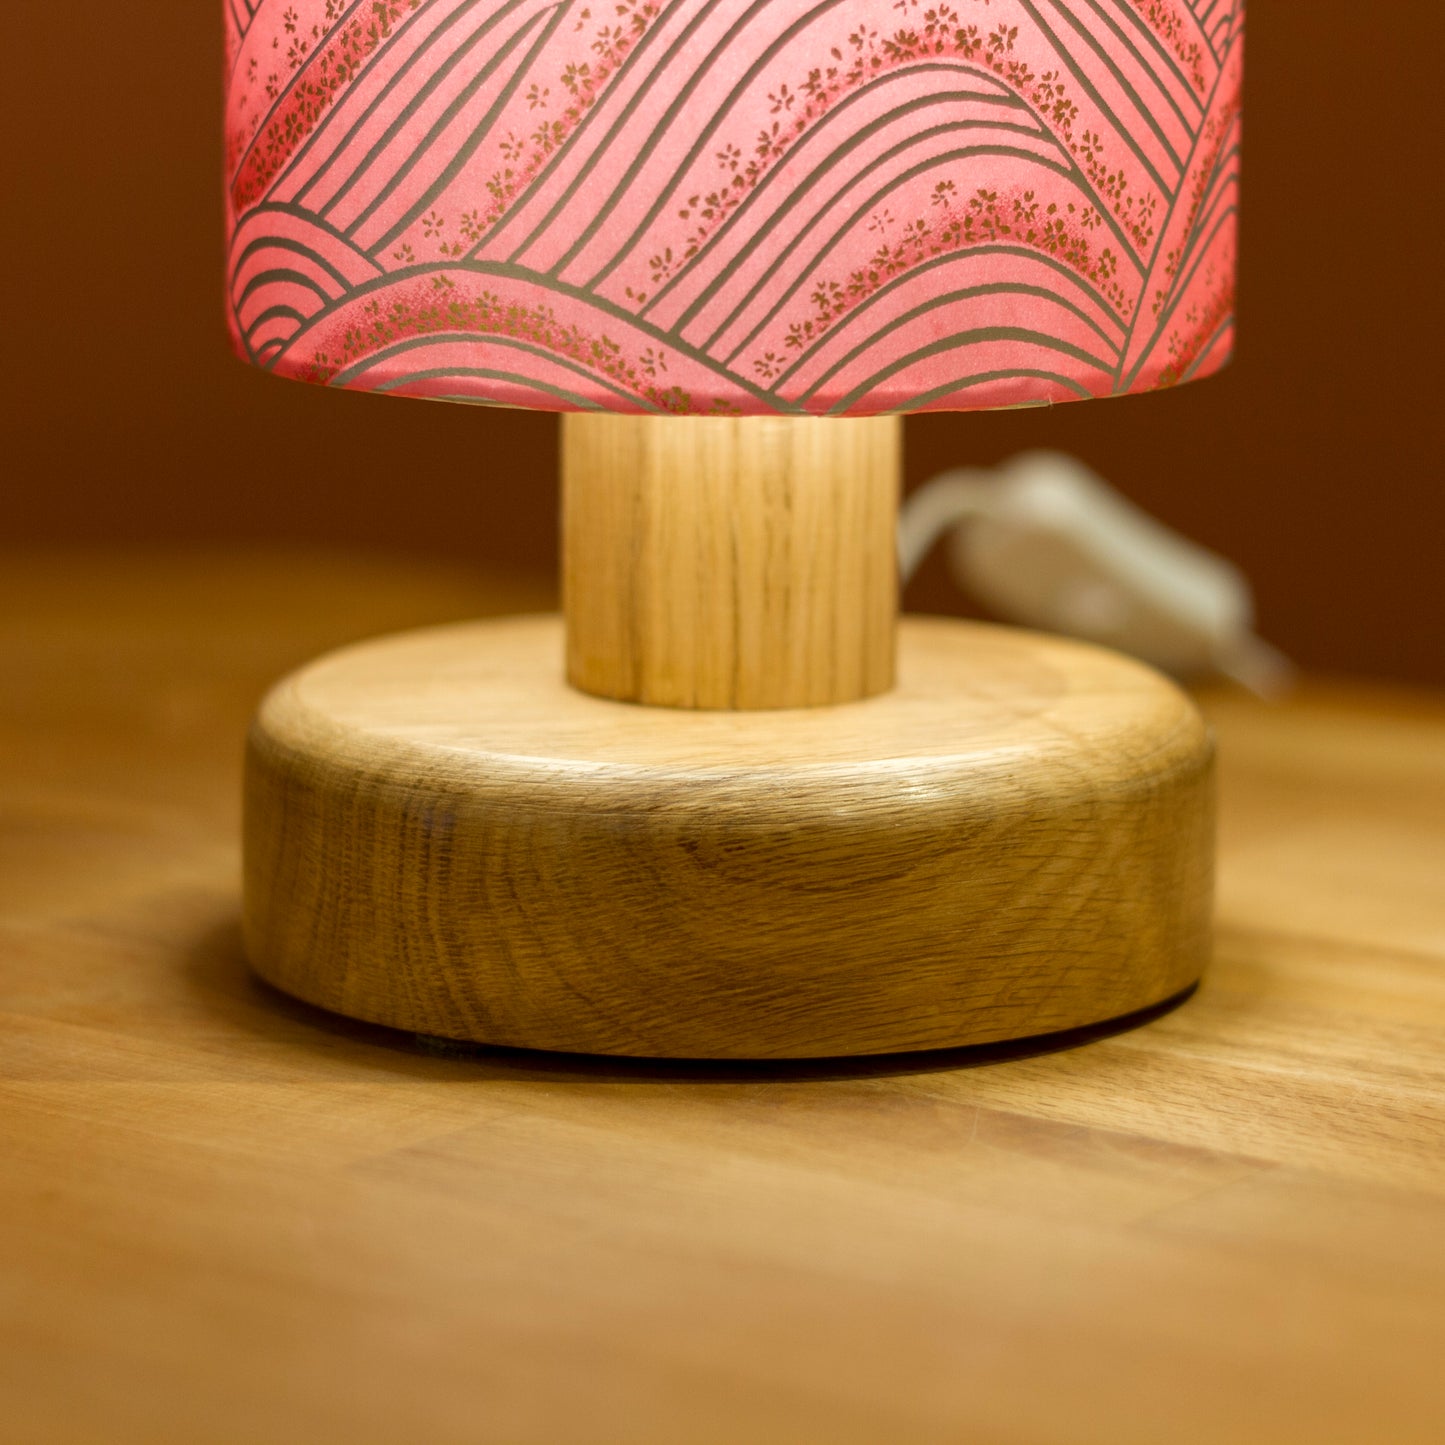 Round Oak Table Lamp with 15cm x 30cm Lamp Shade in Pink Hills Washi - W04